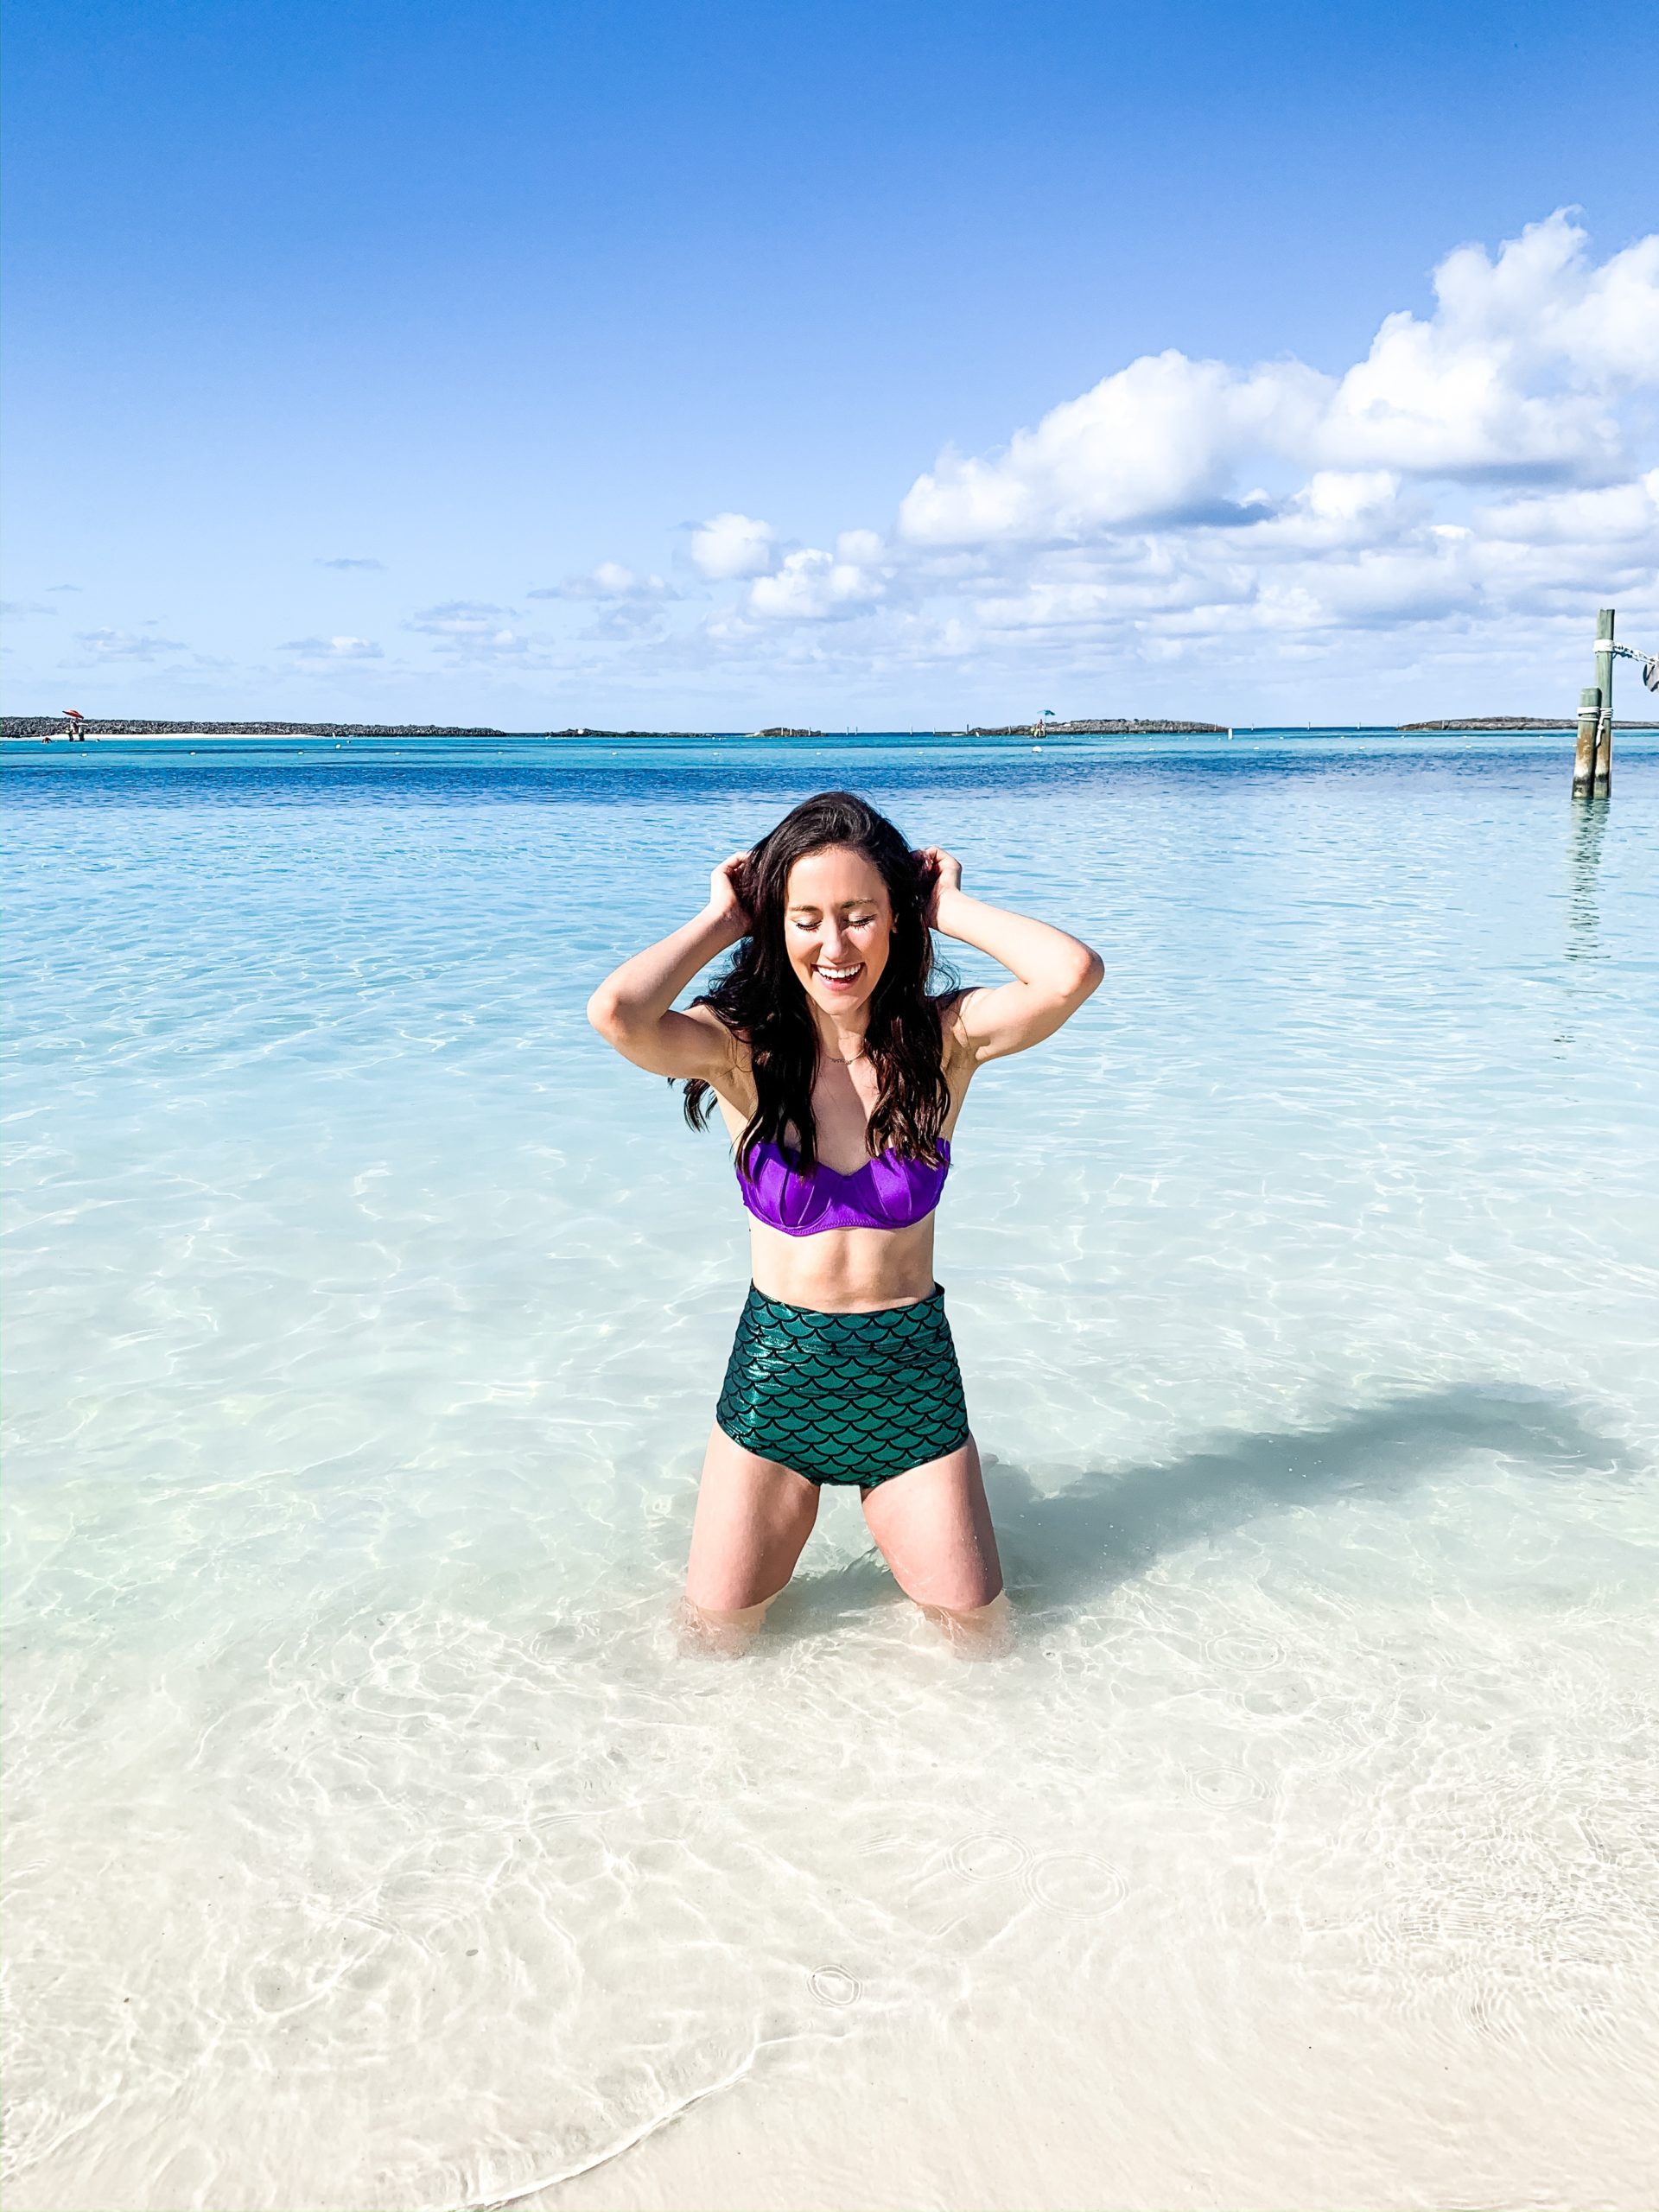 A Full Recap of #DisneyCreatorDays - 7 Days at Disney World and on a Disney Cruise! - The Little Mermaid Swimsuit